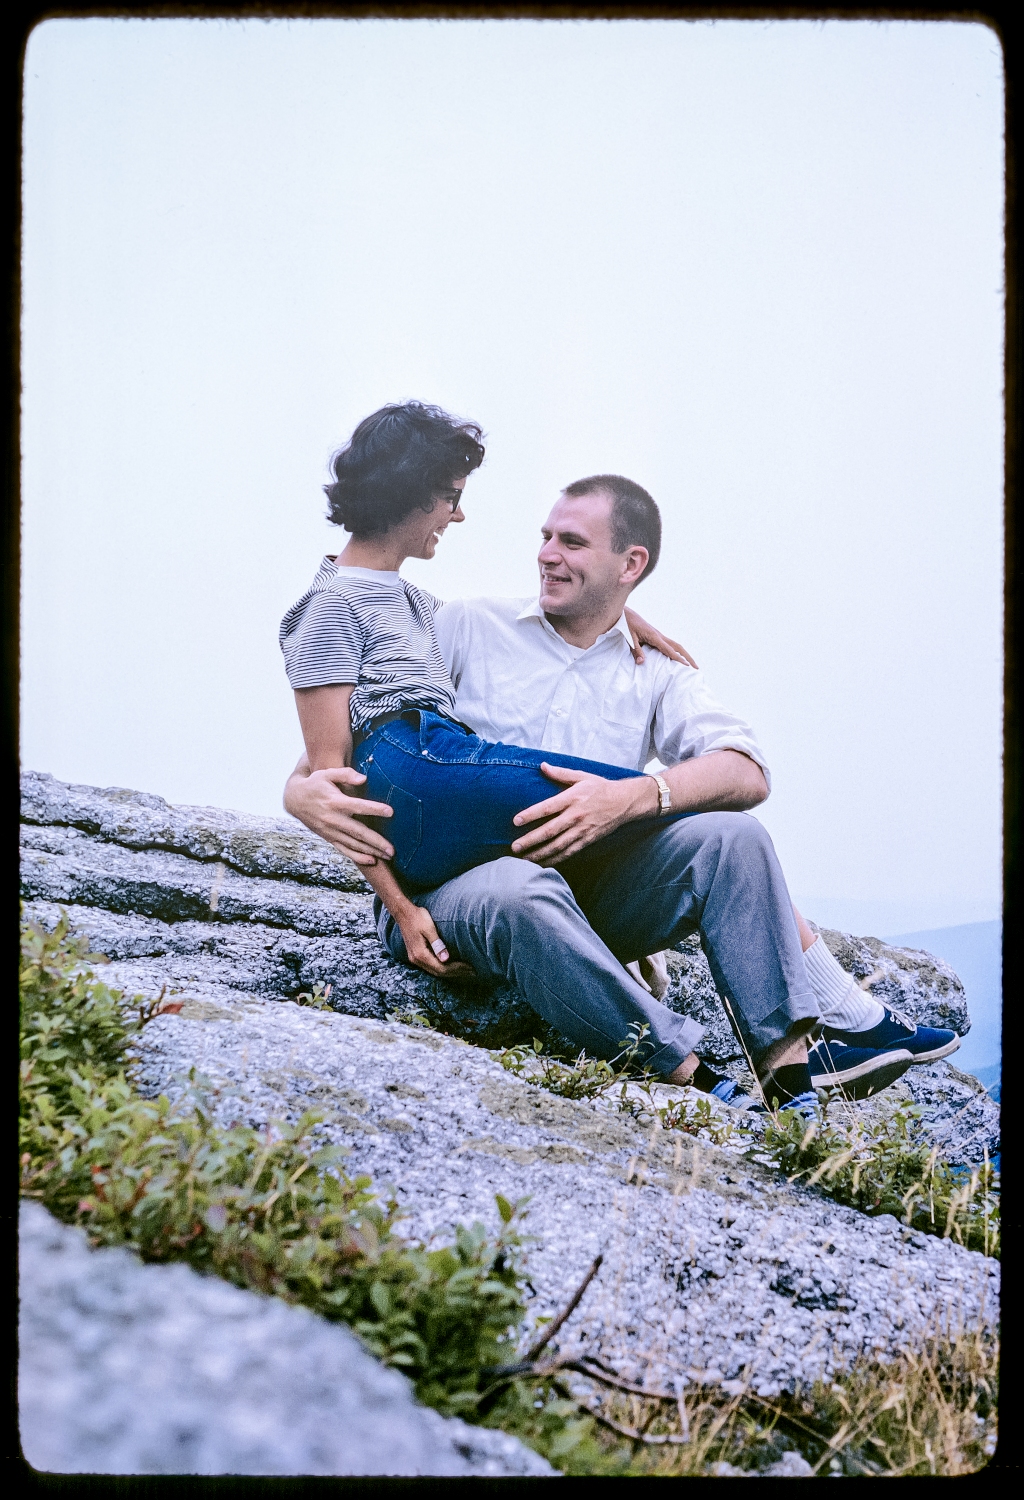 Bob and Dorothy near Freeland, PA, August, 1961. The cliffs here overlook the Lake of the Four Seasons.